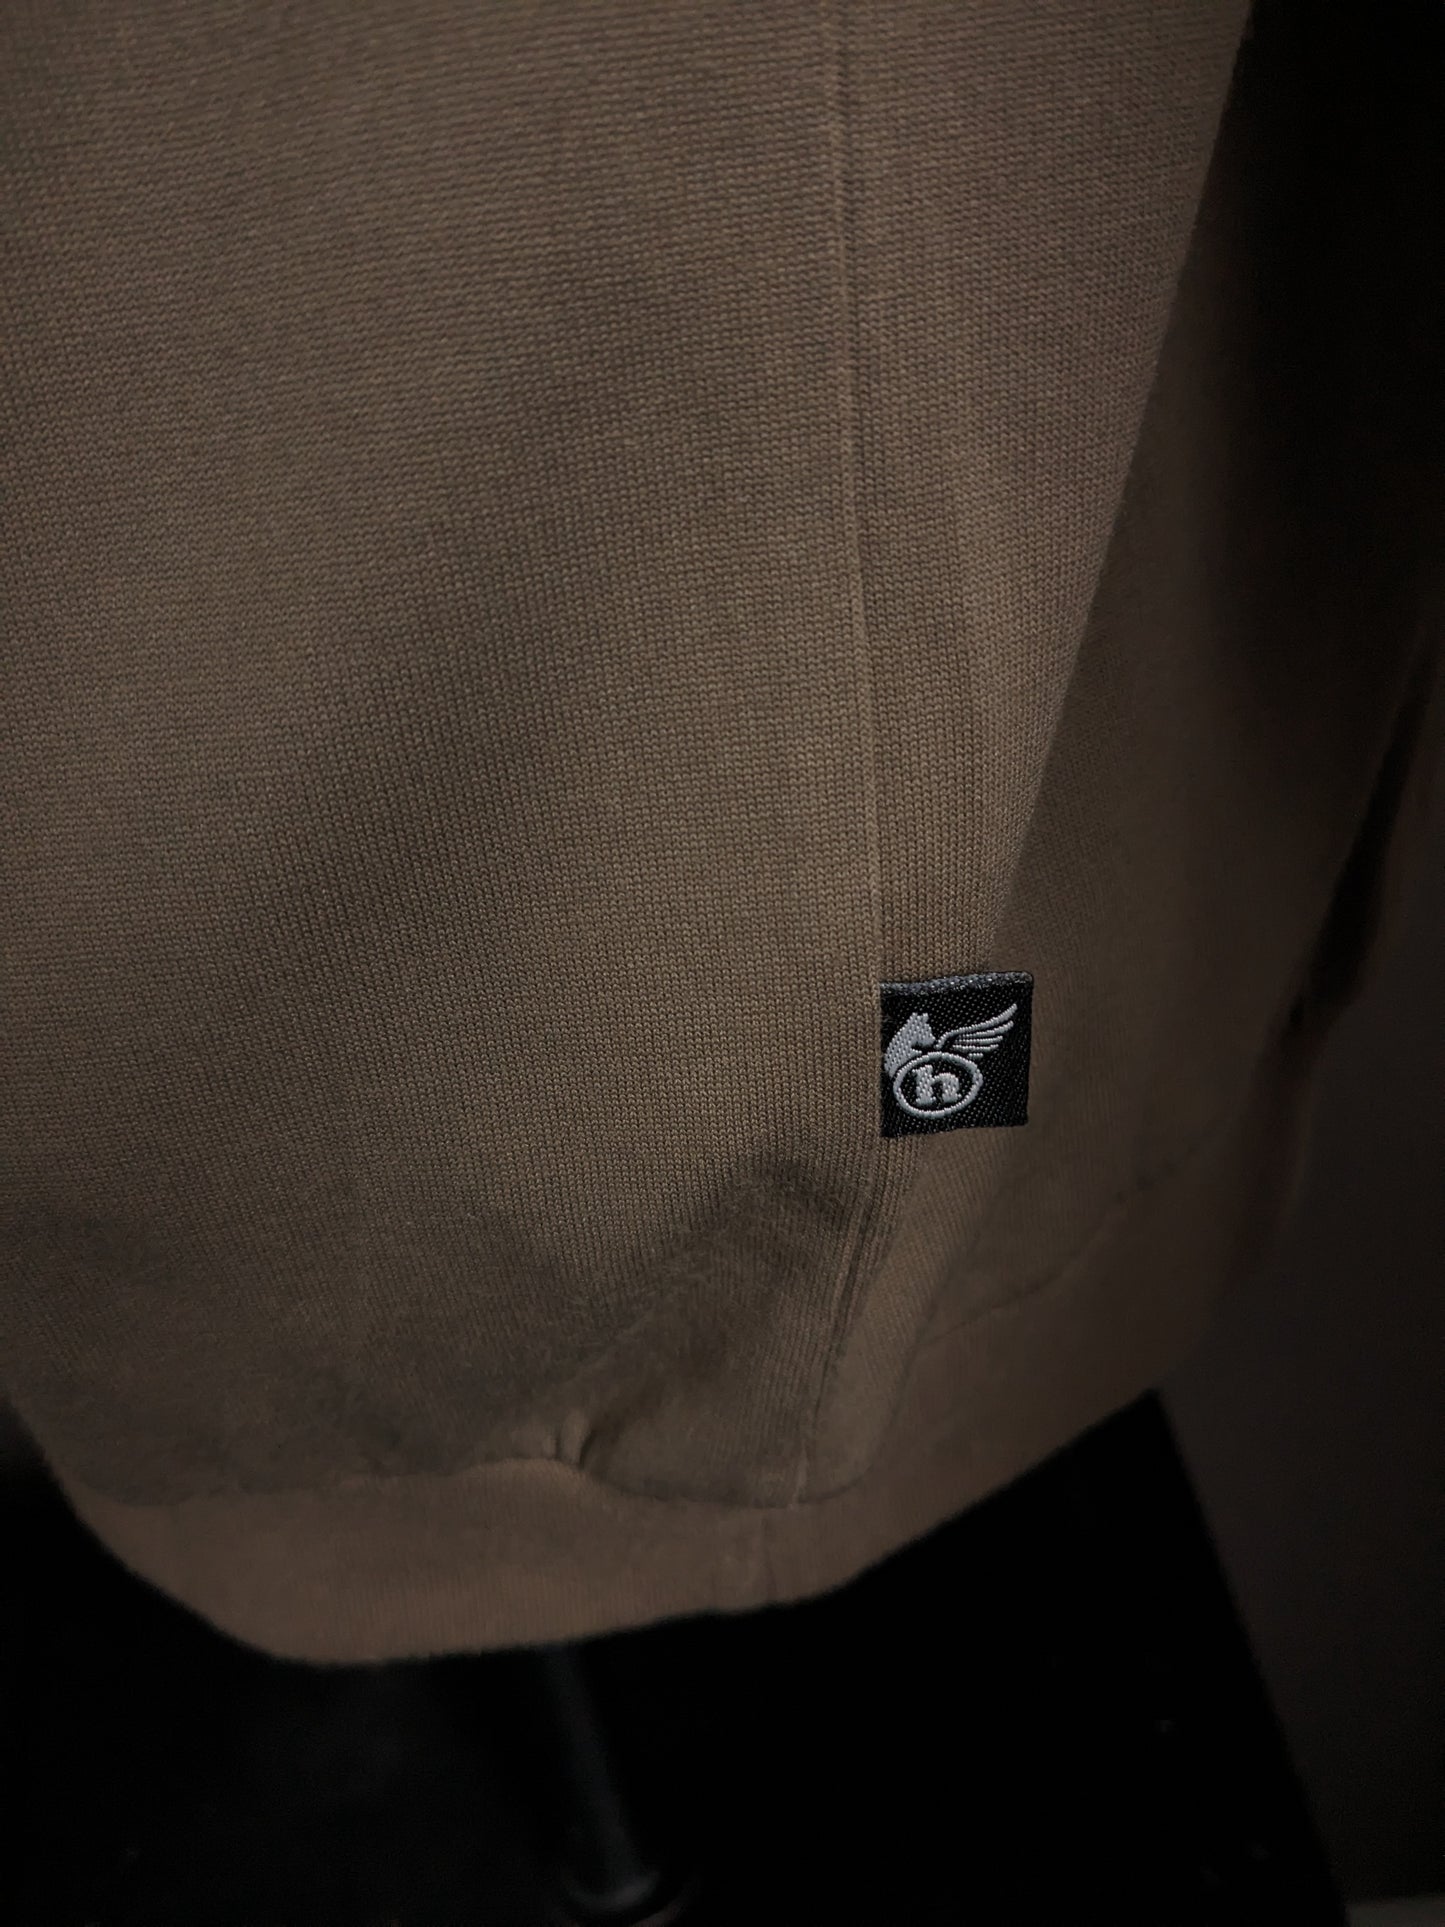 Vintage Hajo Polo with elastic band. Brown. Size L / XL.